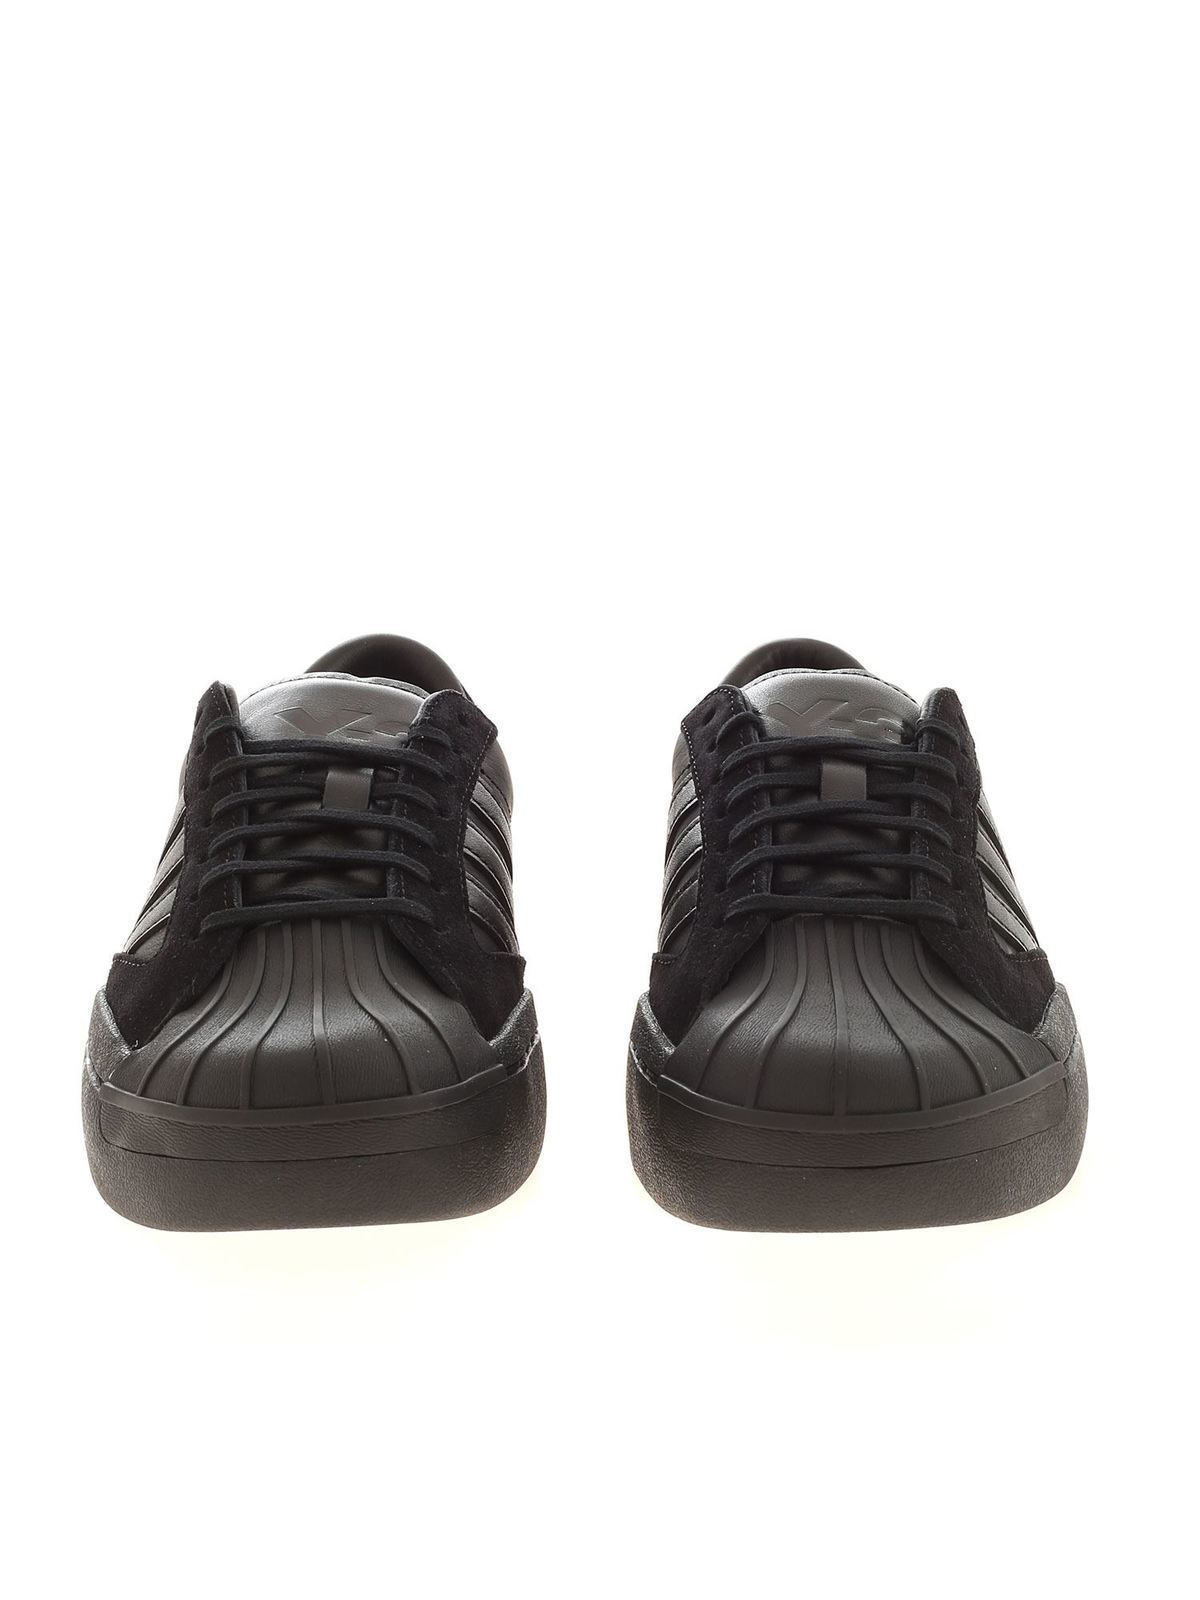 Trainers Y3 By Yohji Yamamoto - Superstar Low sneakers - EH2268